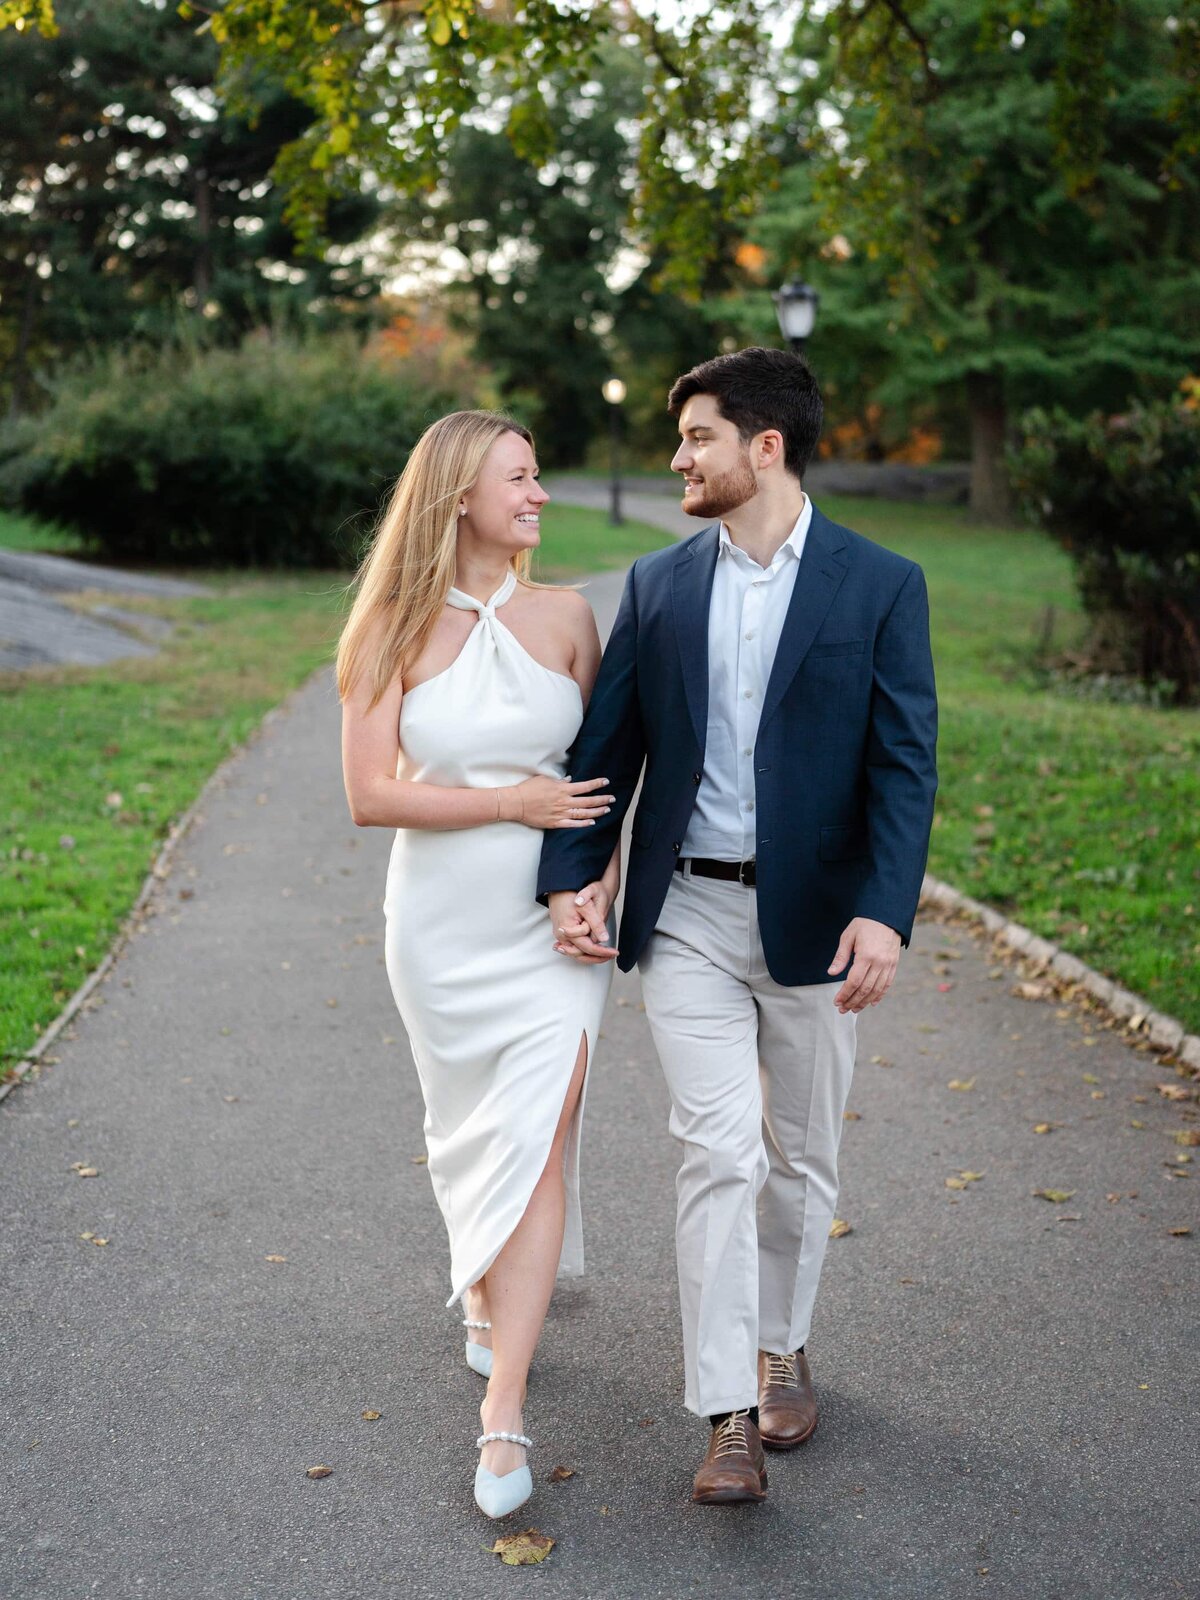 central-park-engagement-photos-nyc-engagement-photographer-the-greens-photo-002